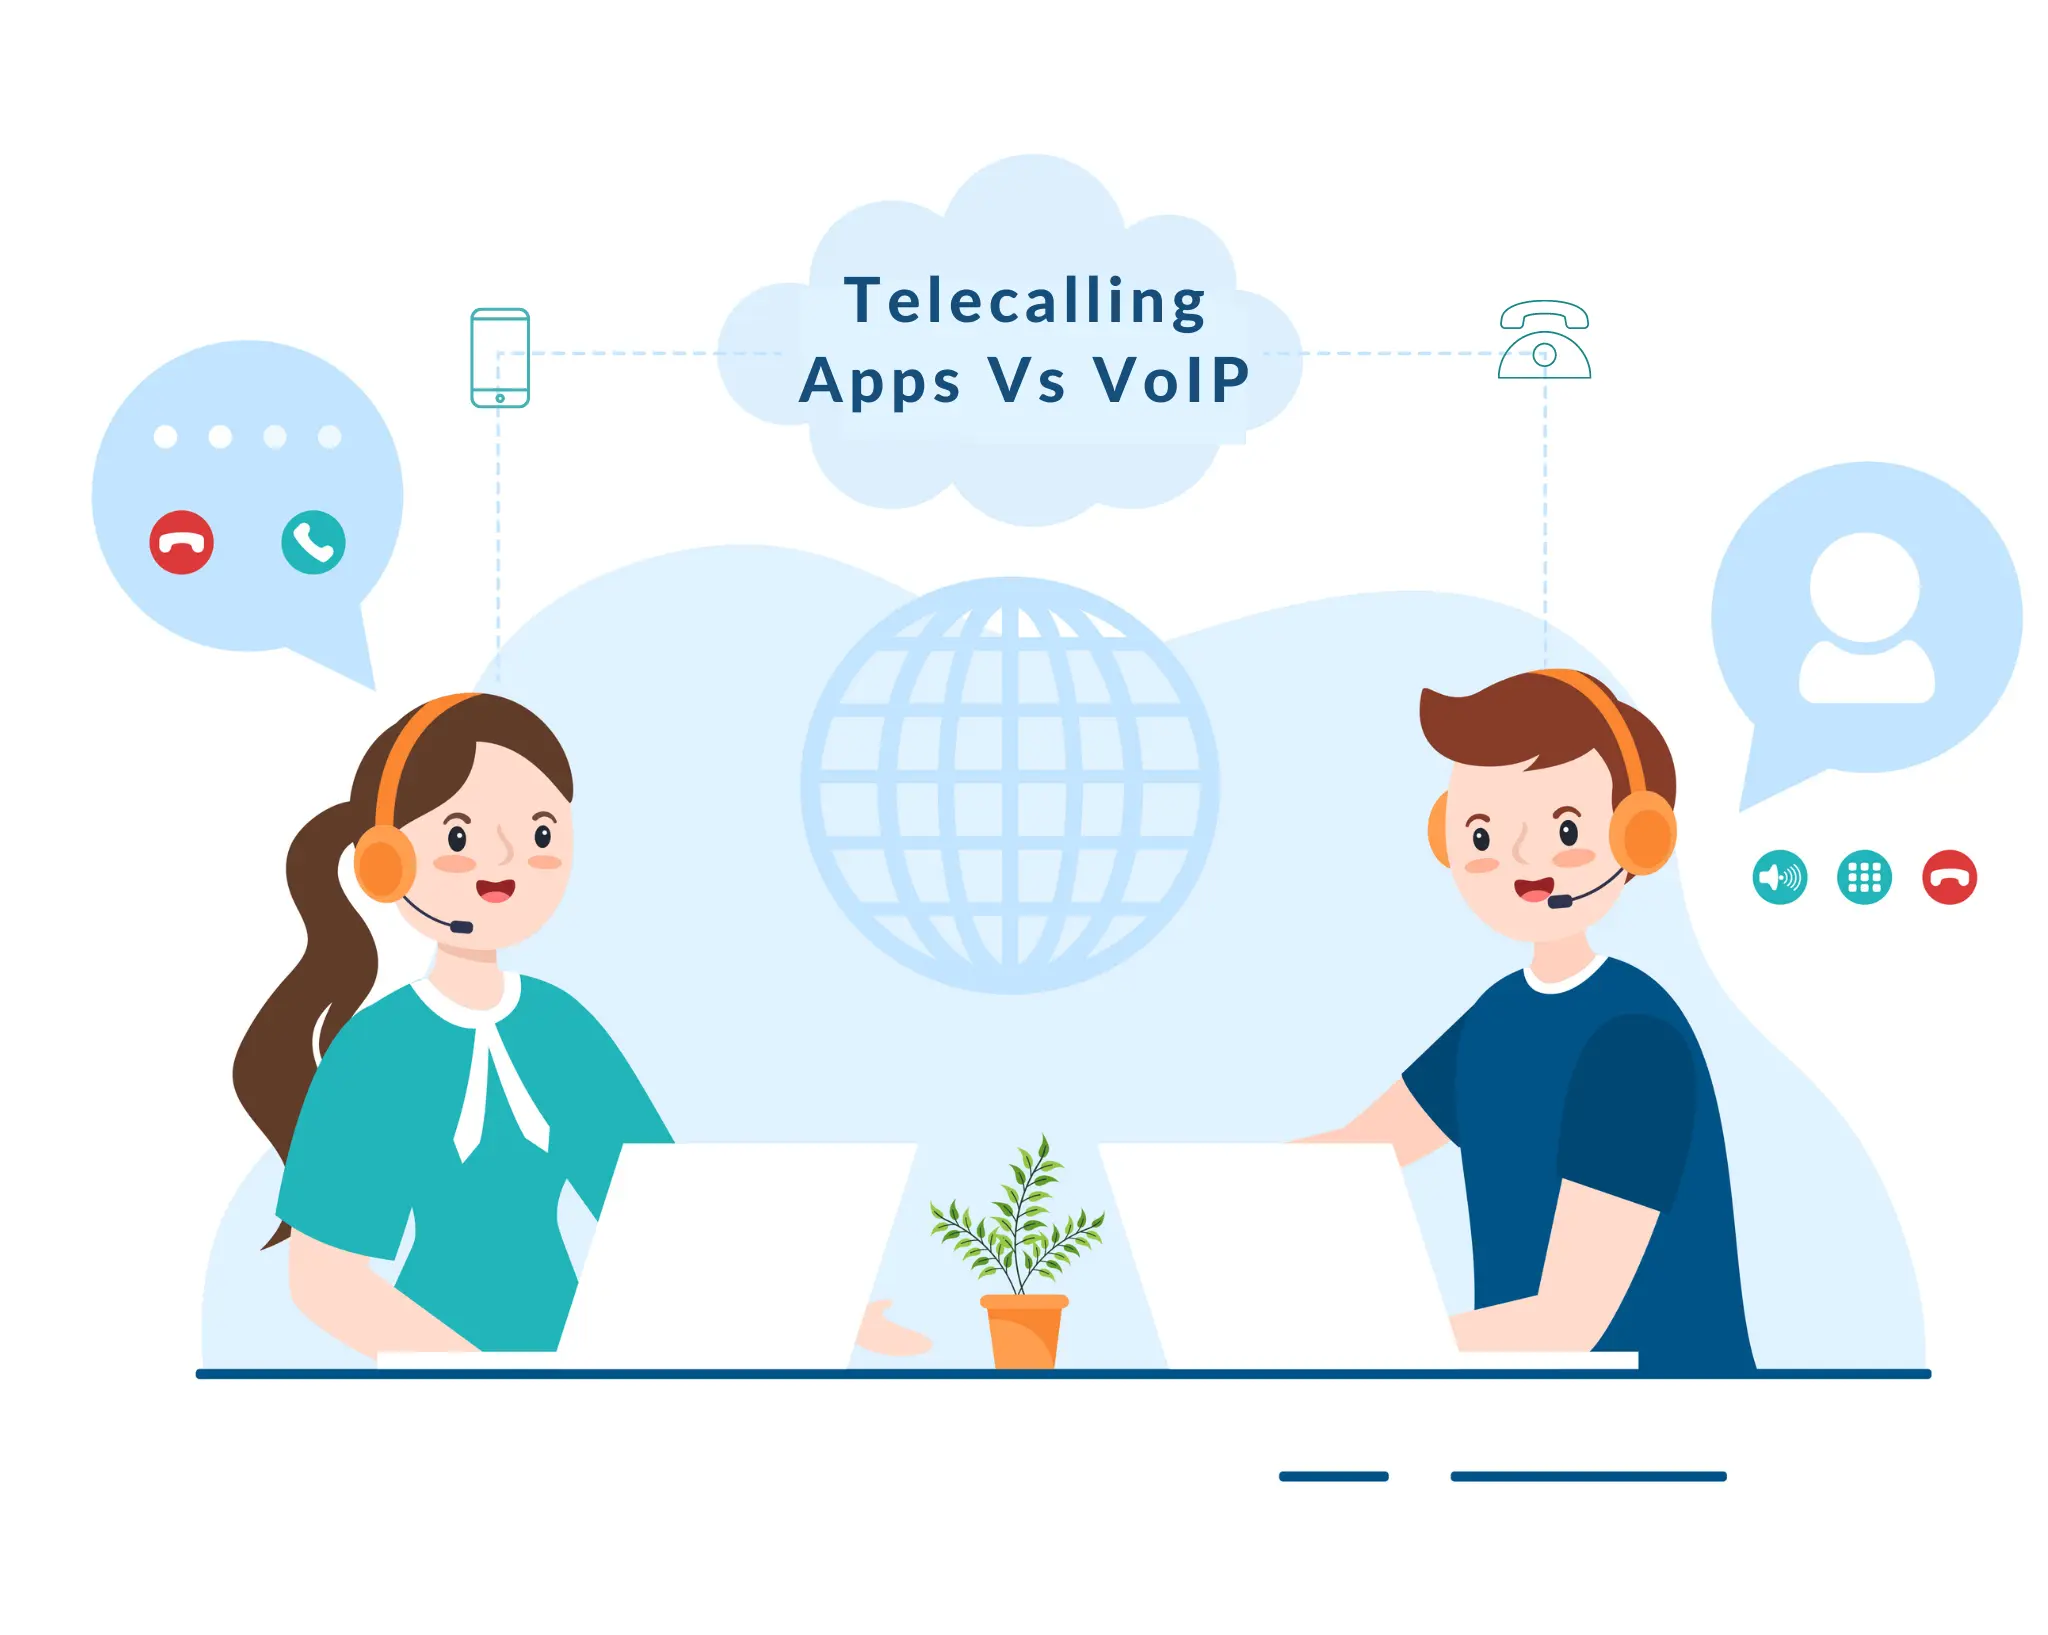 Telecalling apps vs voip call technology hand drawn illustration